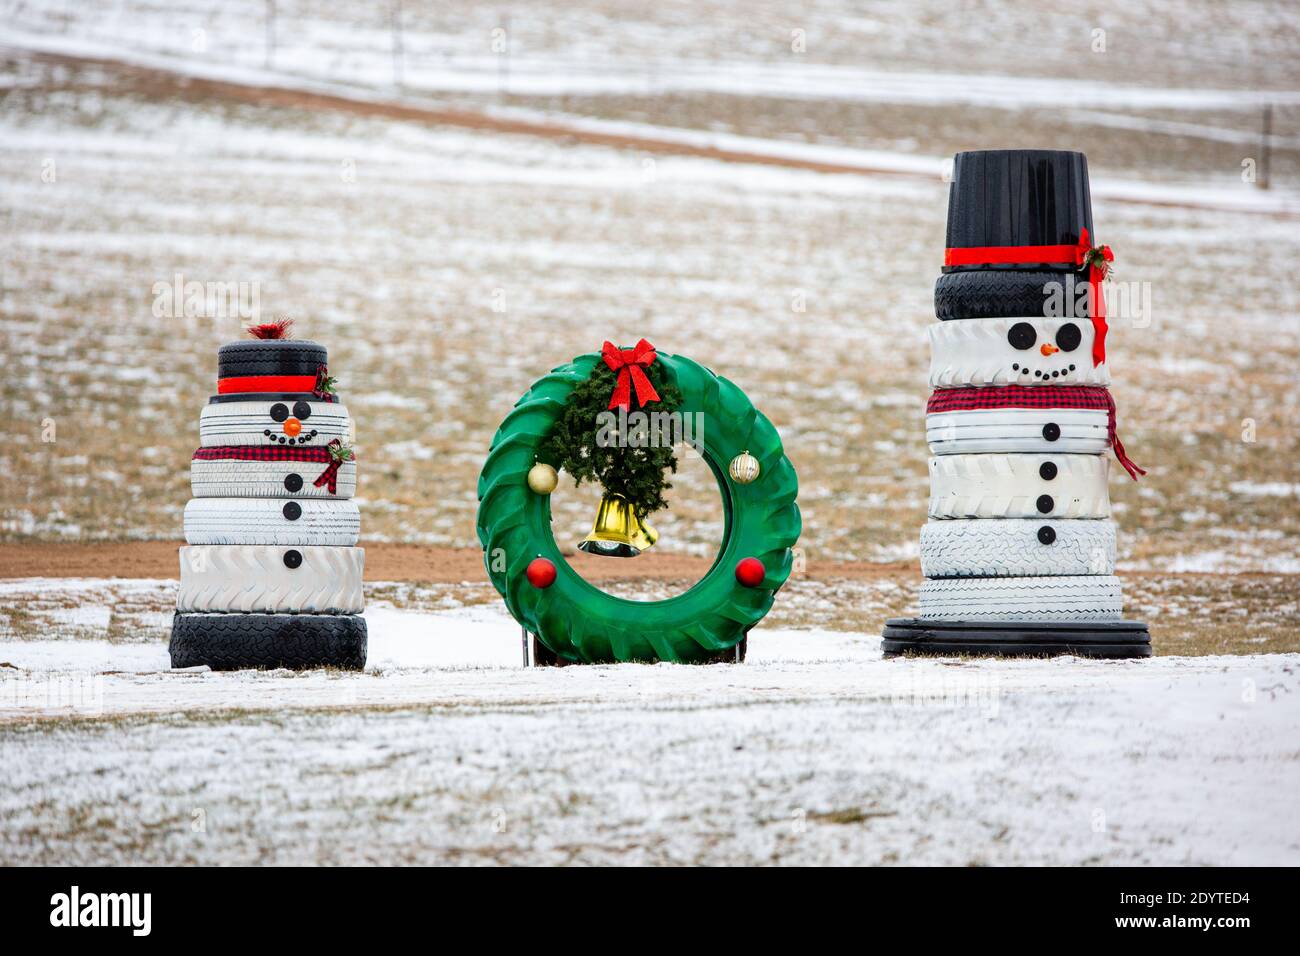 Snowmen and a wreath made out of recycled tires for Christmas decorations, horizontal Stock Photo